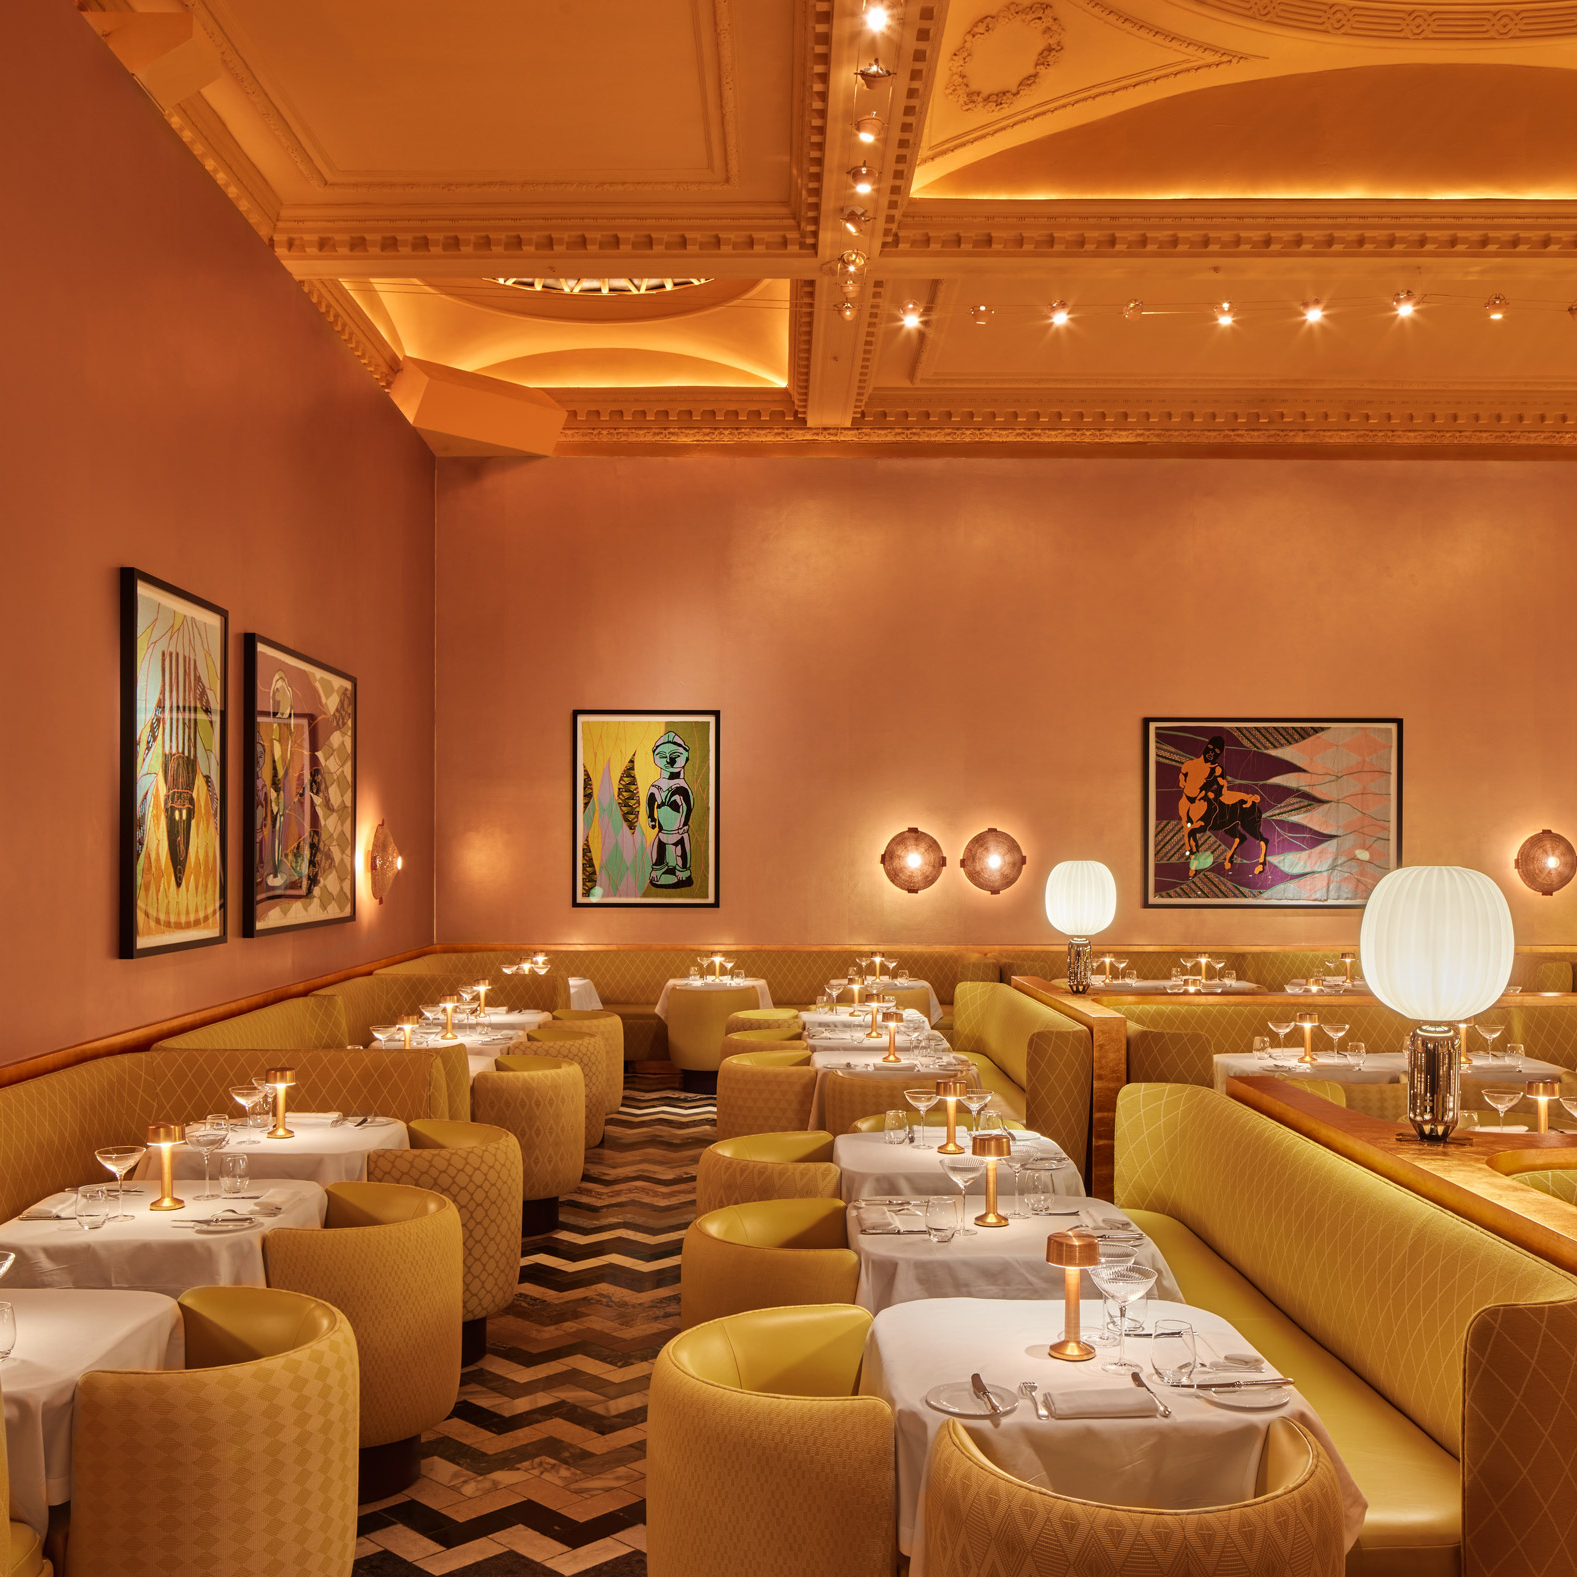 13 French Restaurants That Should Be on Any Las Vegas Dining Agenda